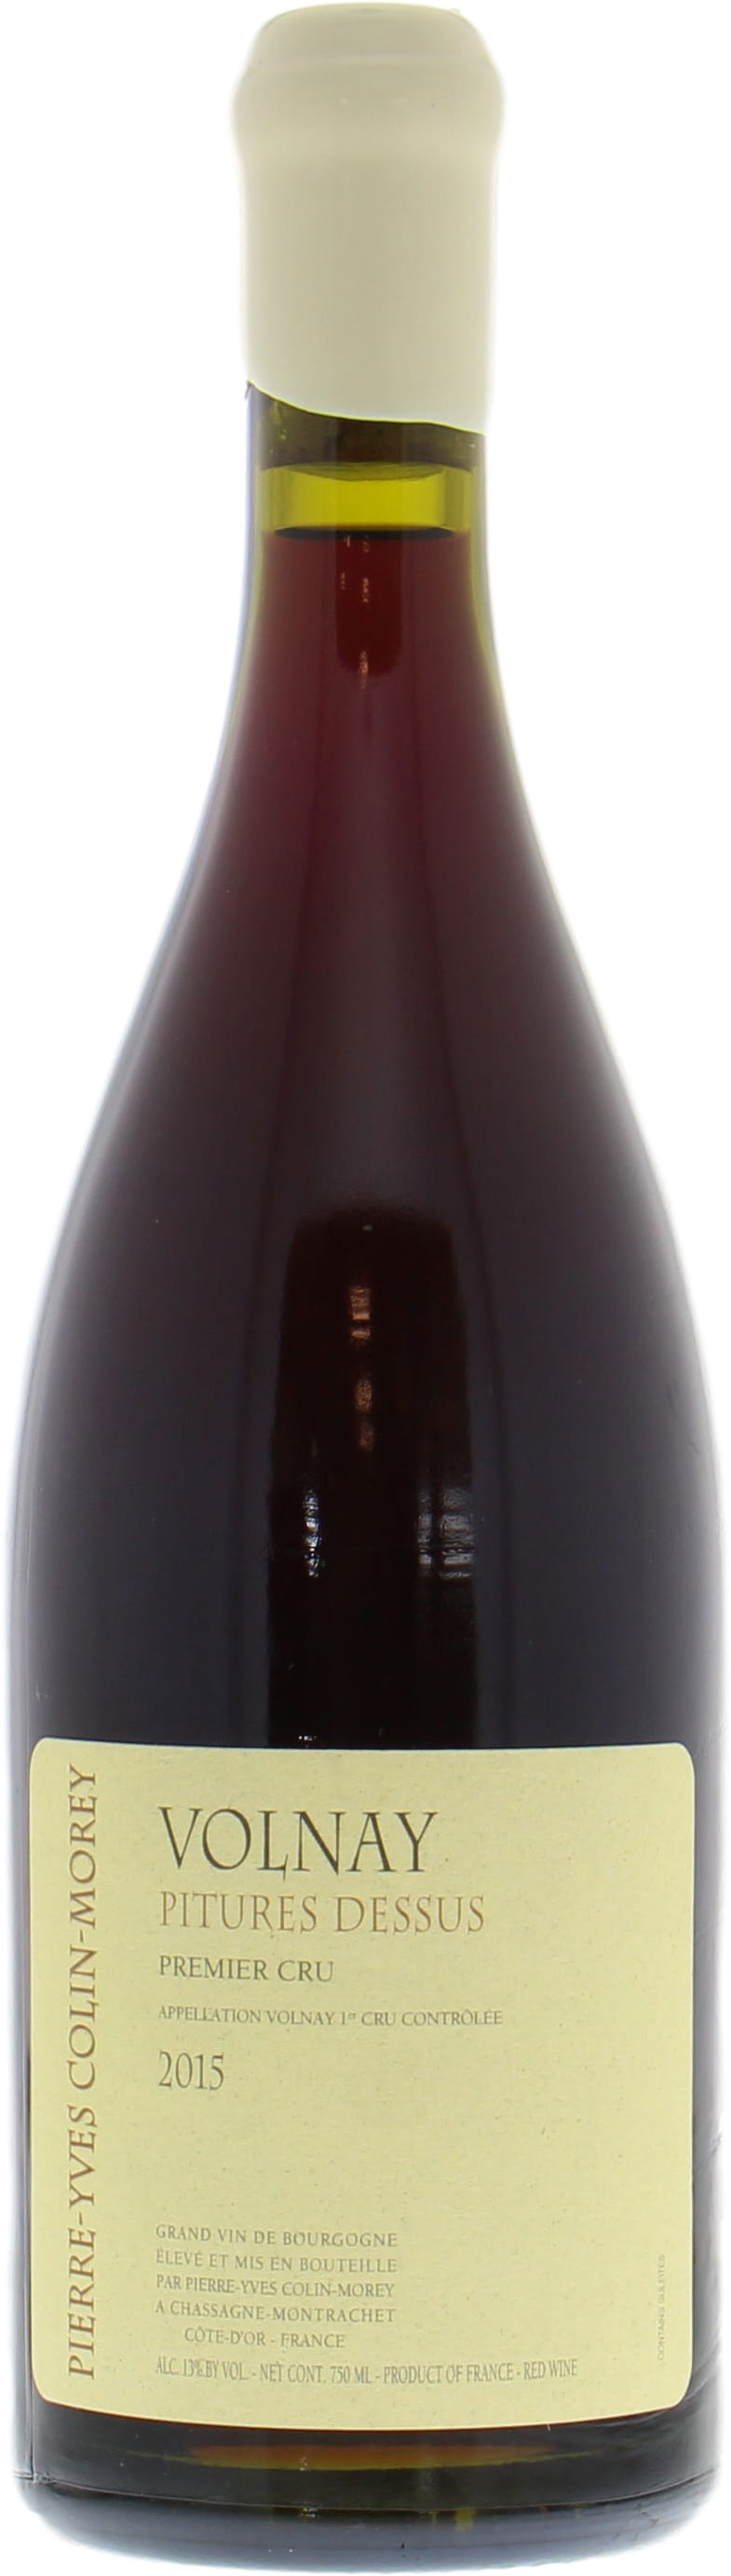 Pierre-Yves Colin-Morey - Volnay Pitures Dessus 2015 Perfect